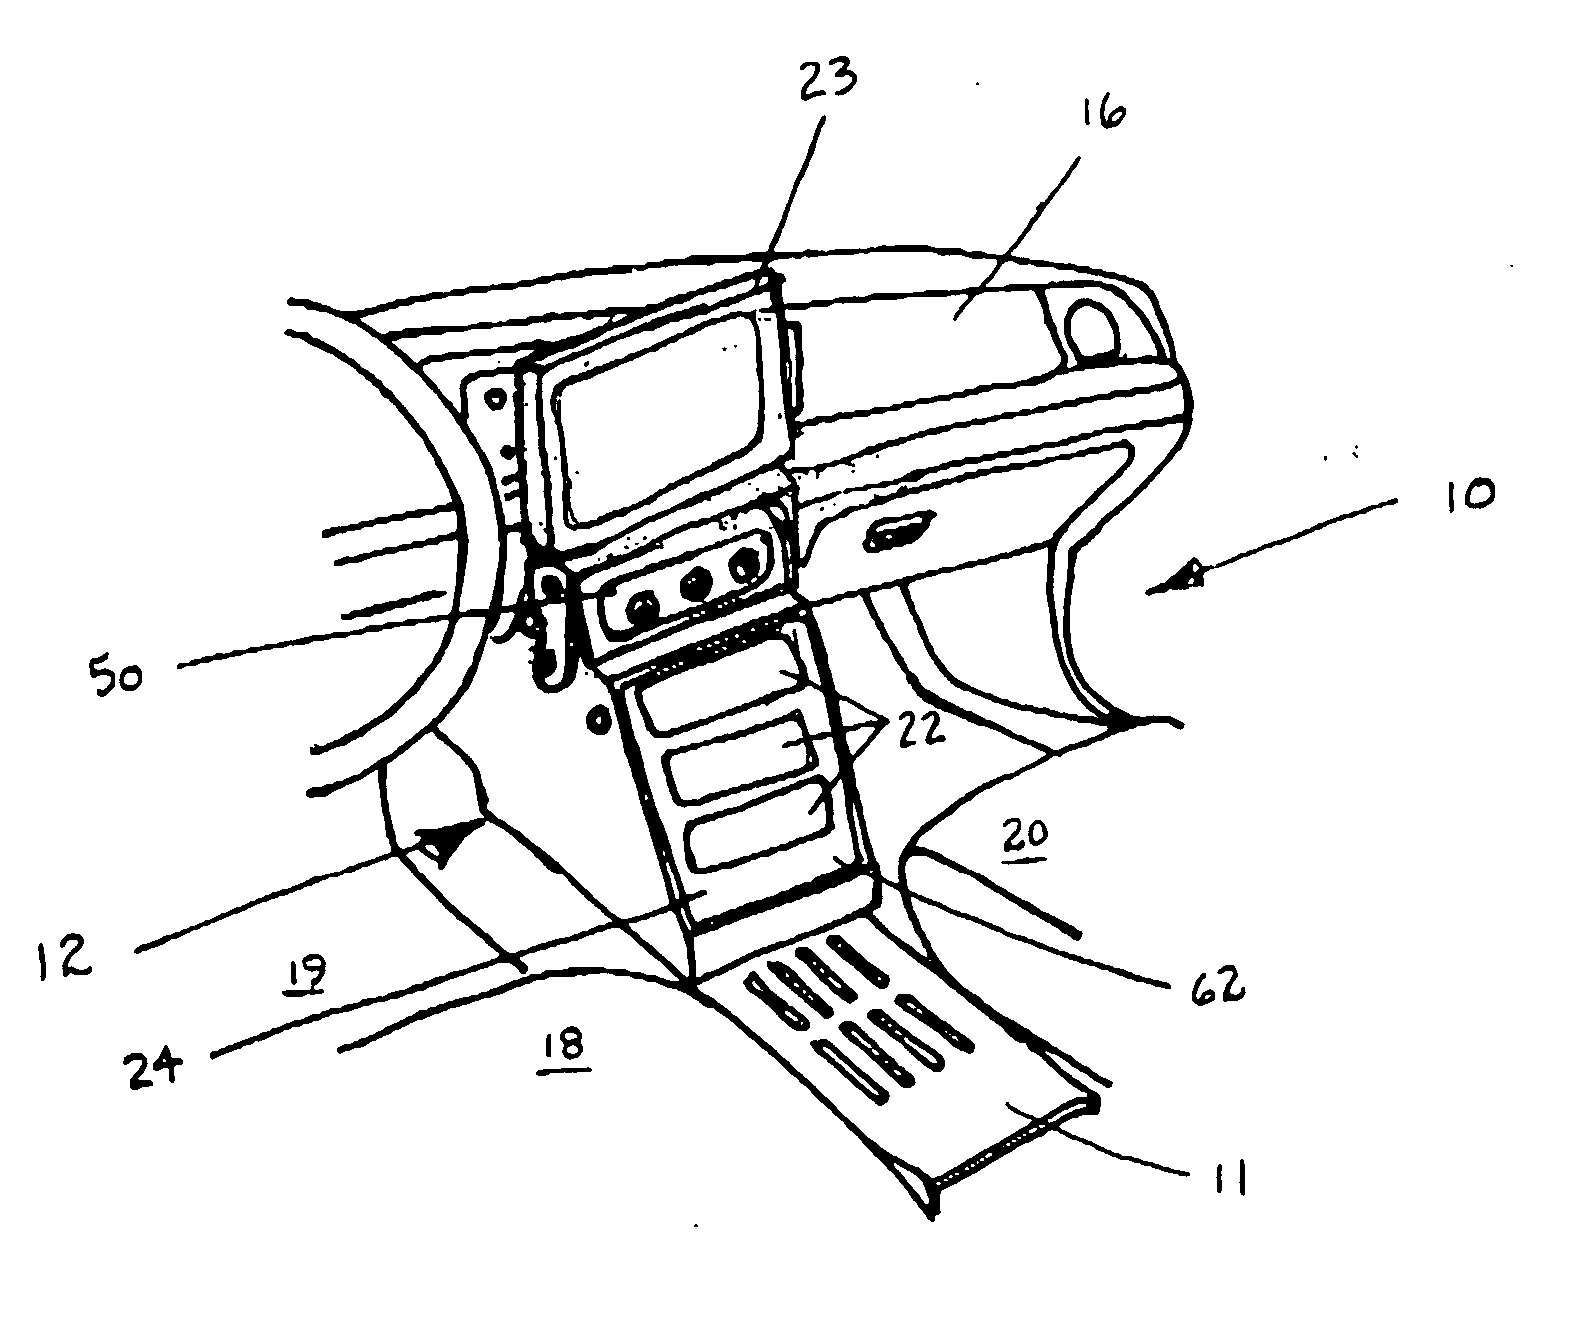 Computer monitor support device for a vehicle